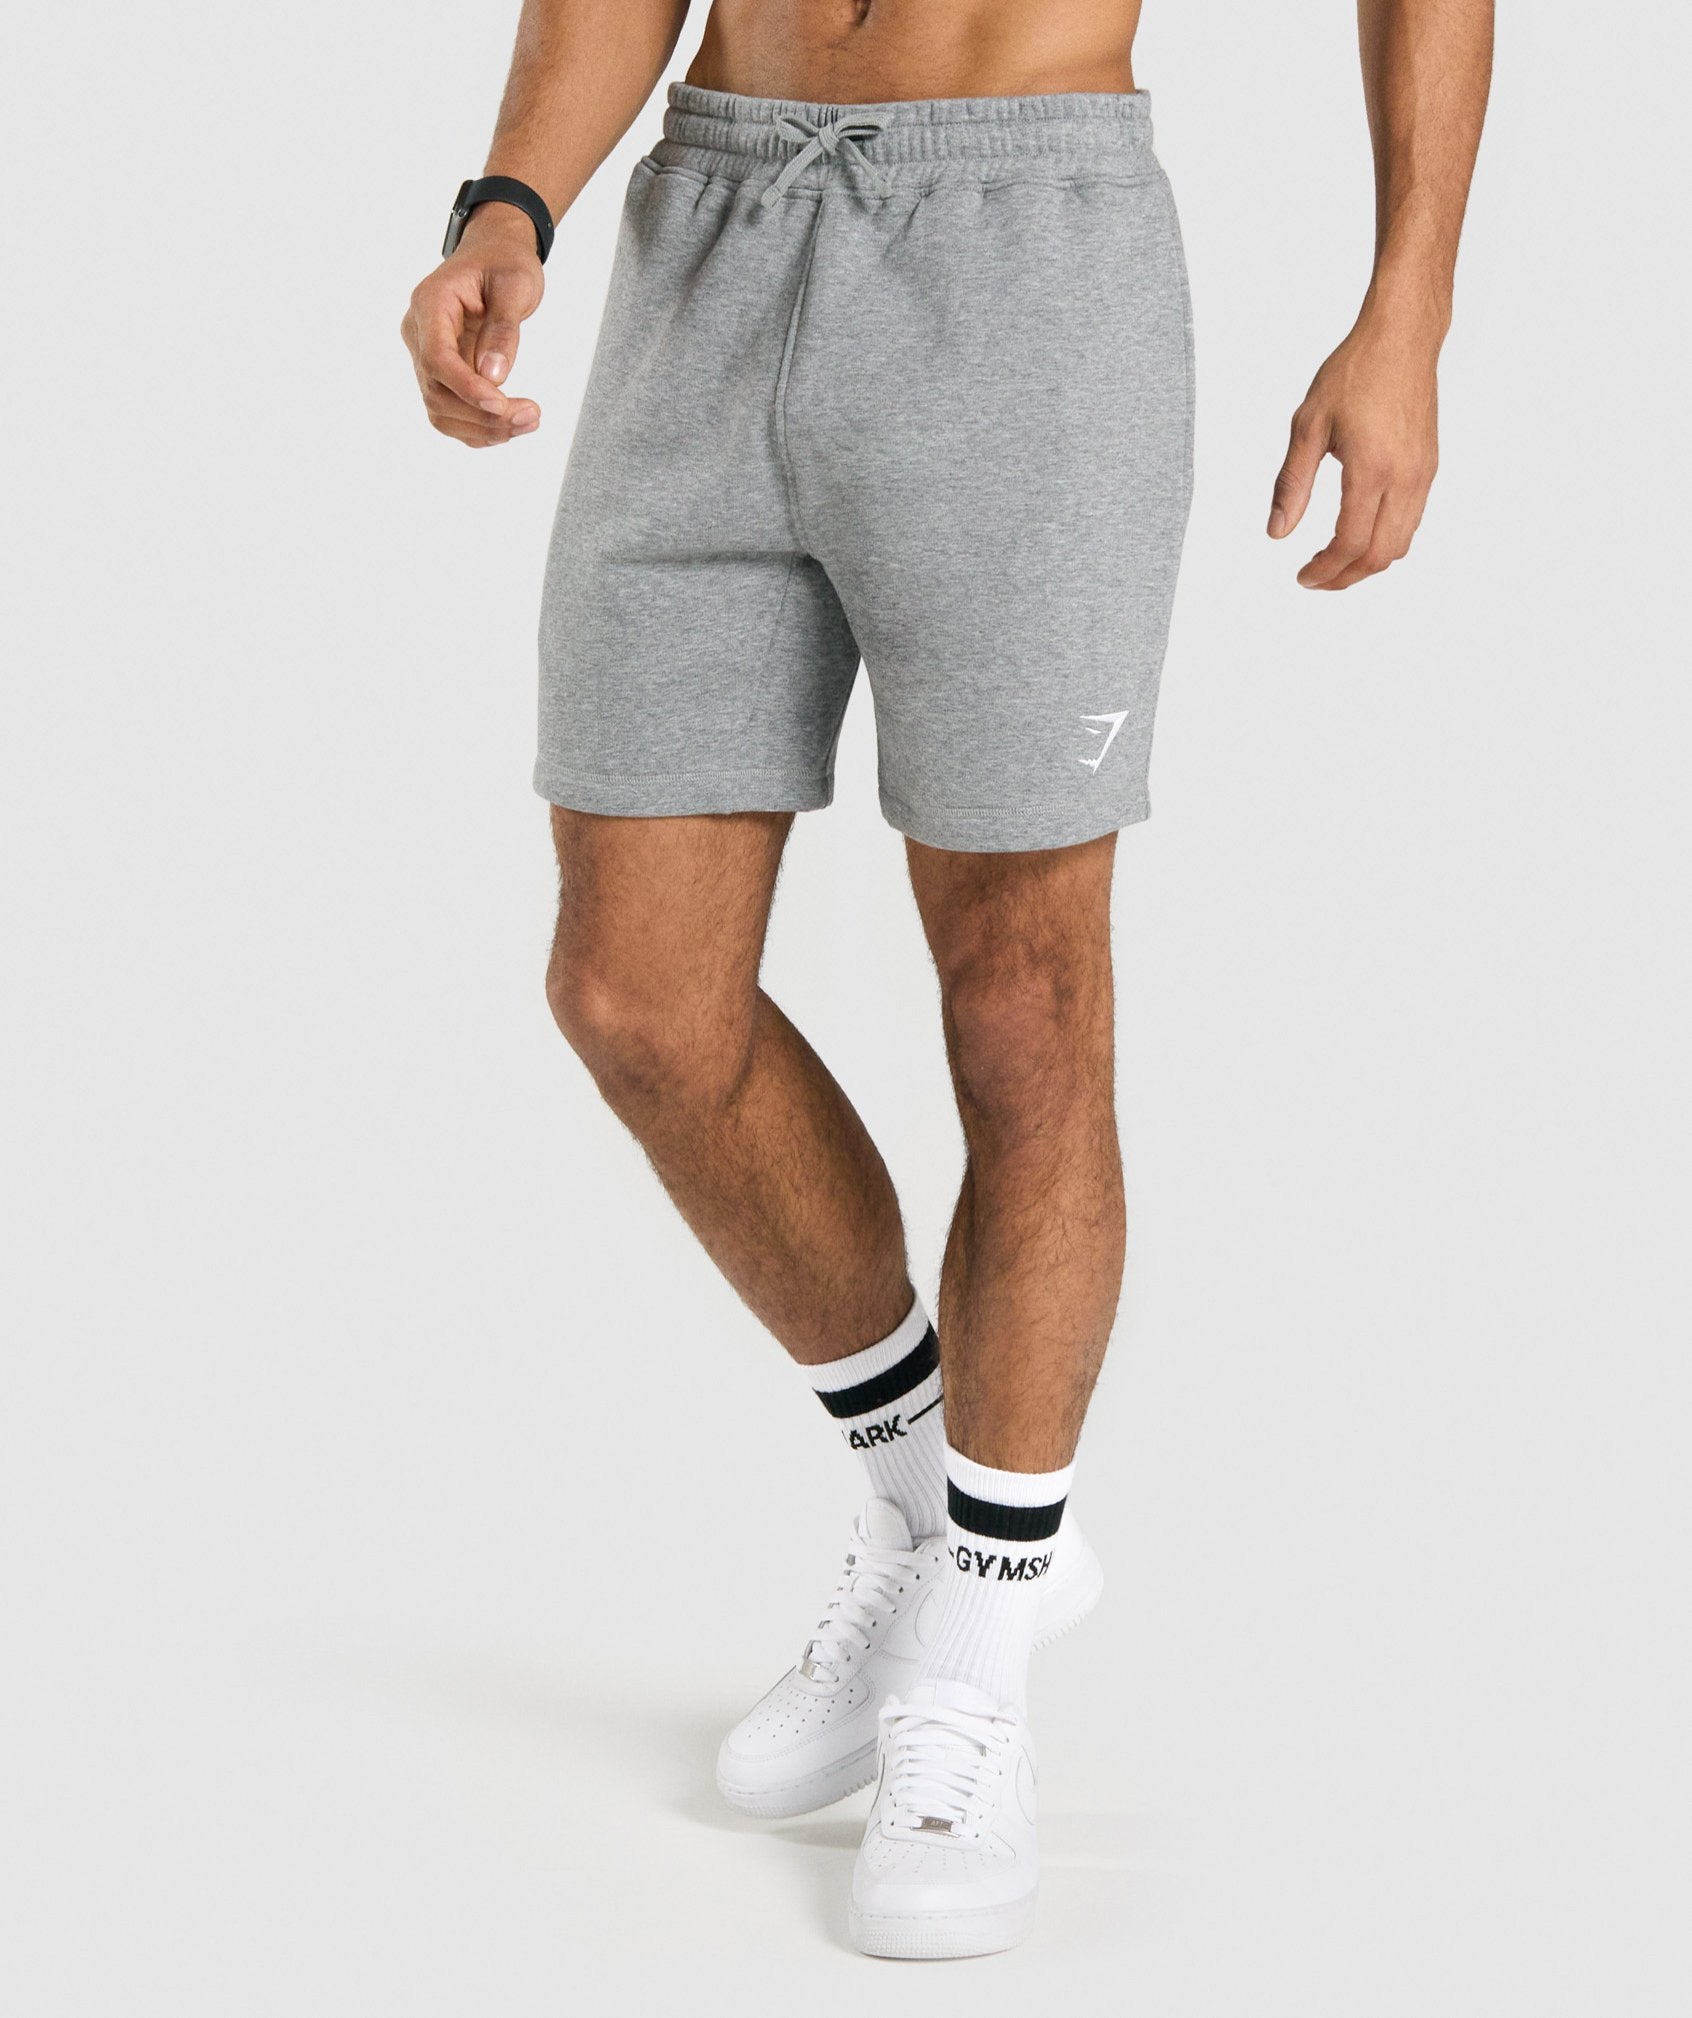 Crest Shorts in Charcoal Marl - view 1